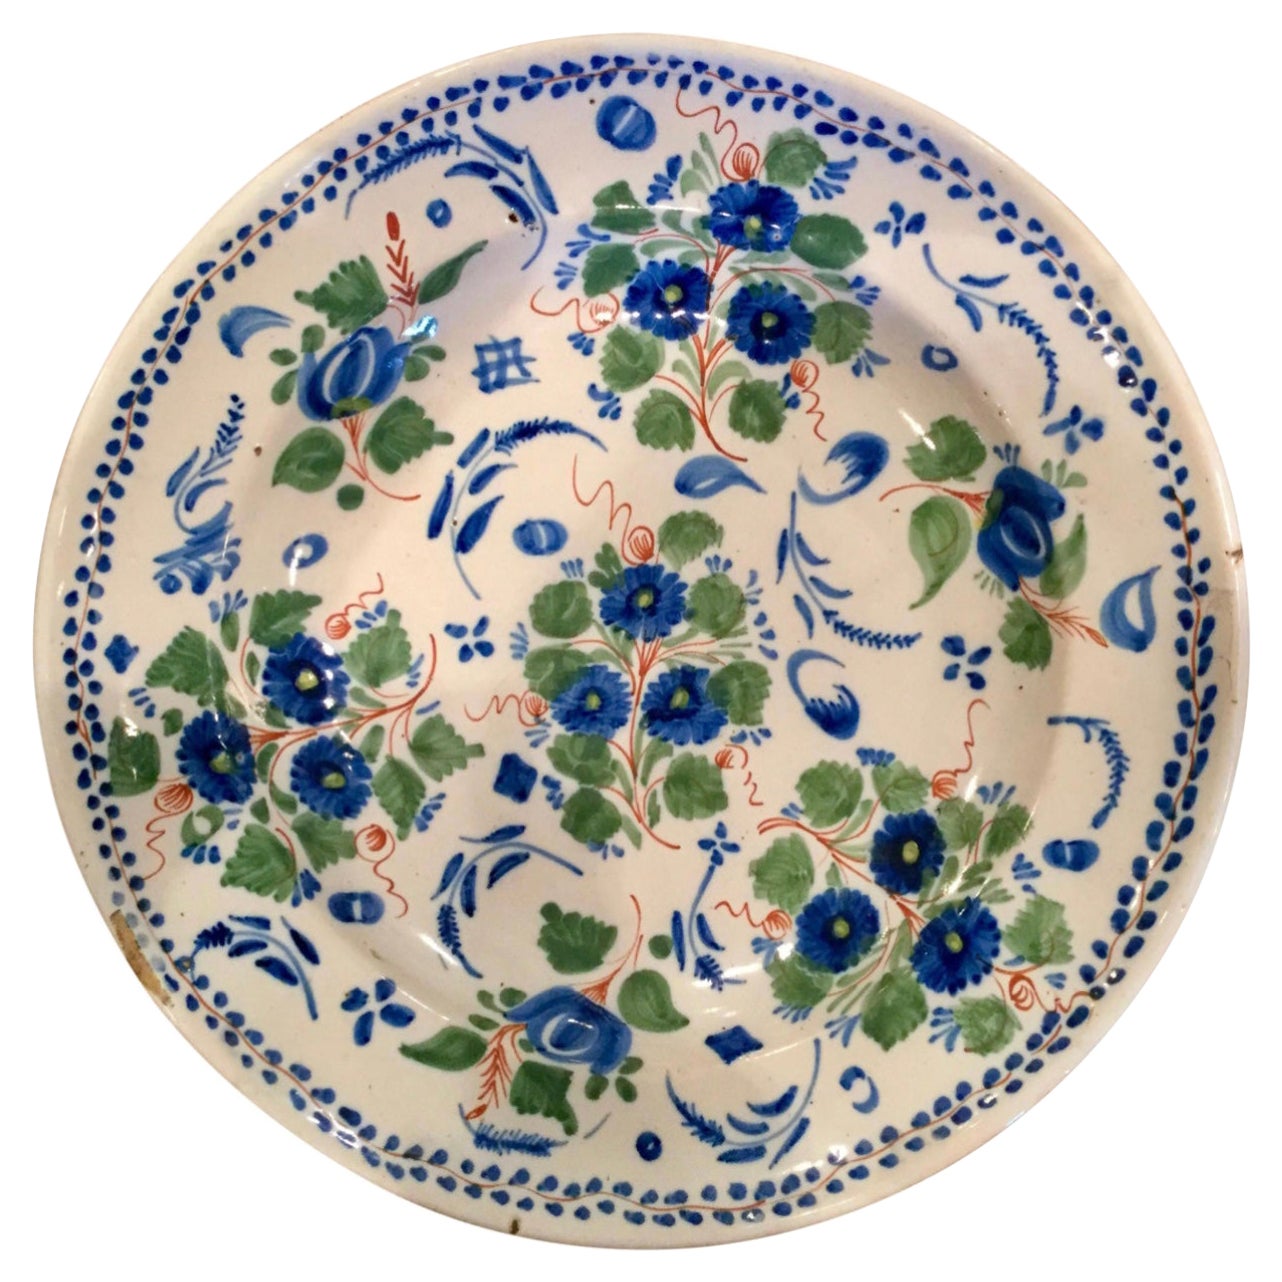 18th Century Spanish Delft Charger